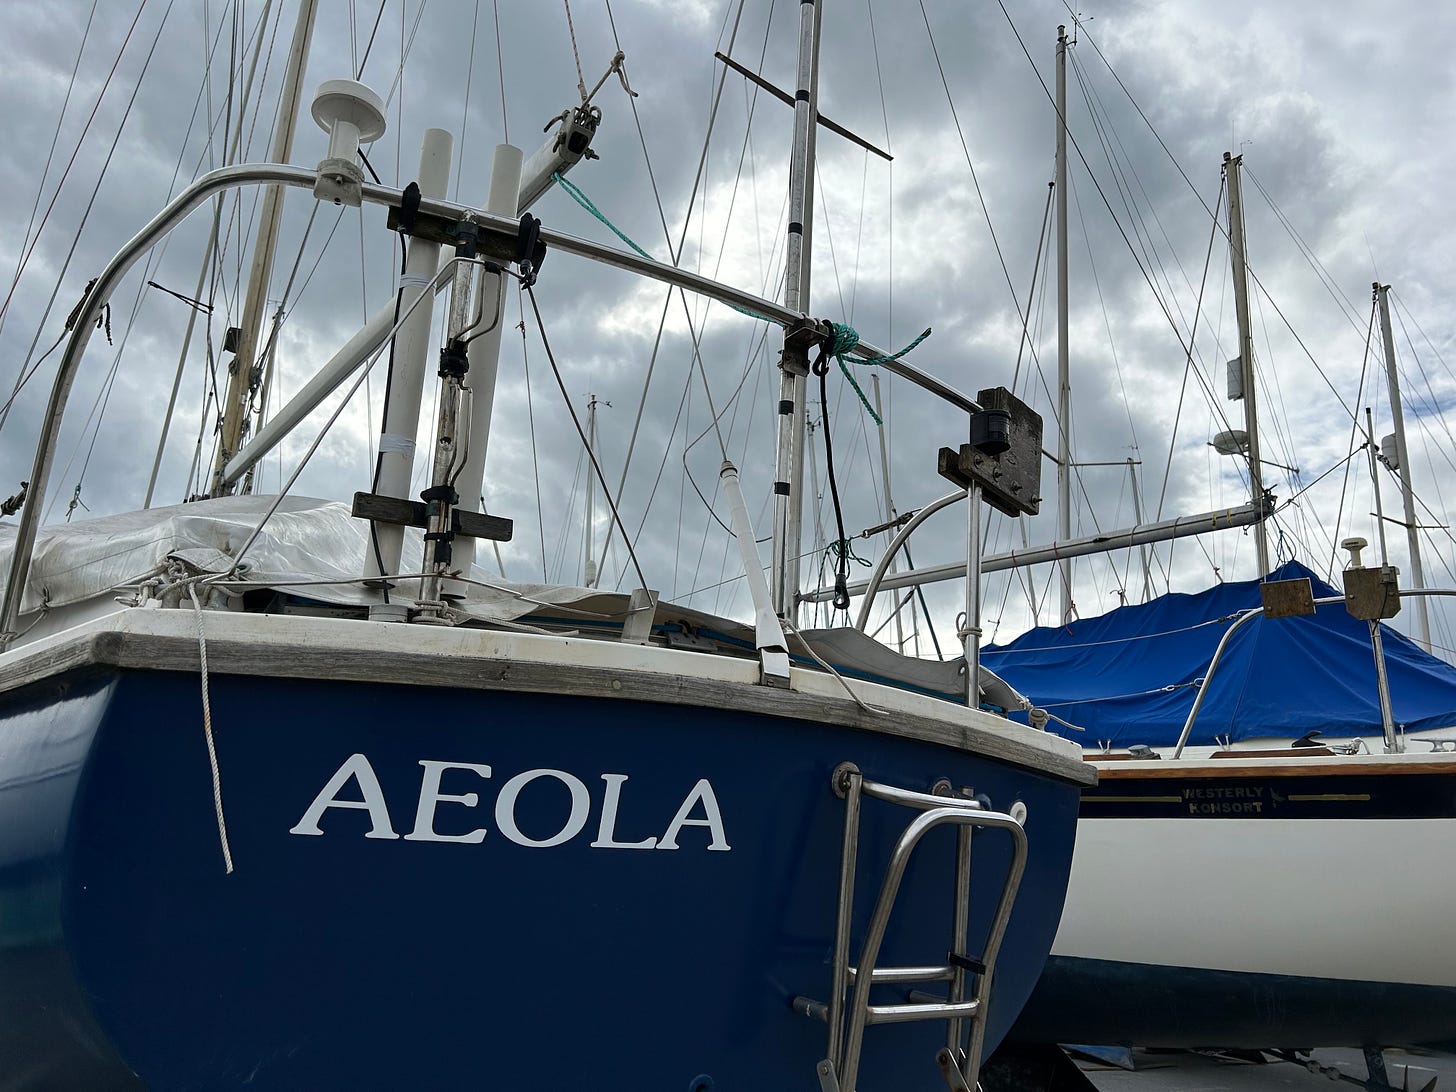 A yacht stored on dry land next to the harbour in Lyme Regis. This is the view of the stern. In white lettering on the blue-painted hull is its name Aeola. Another yacht is alongside and we can see part of its white hull. Image: Roland’s Travels.